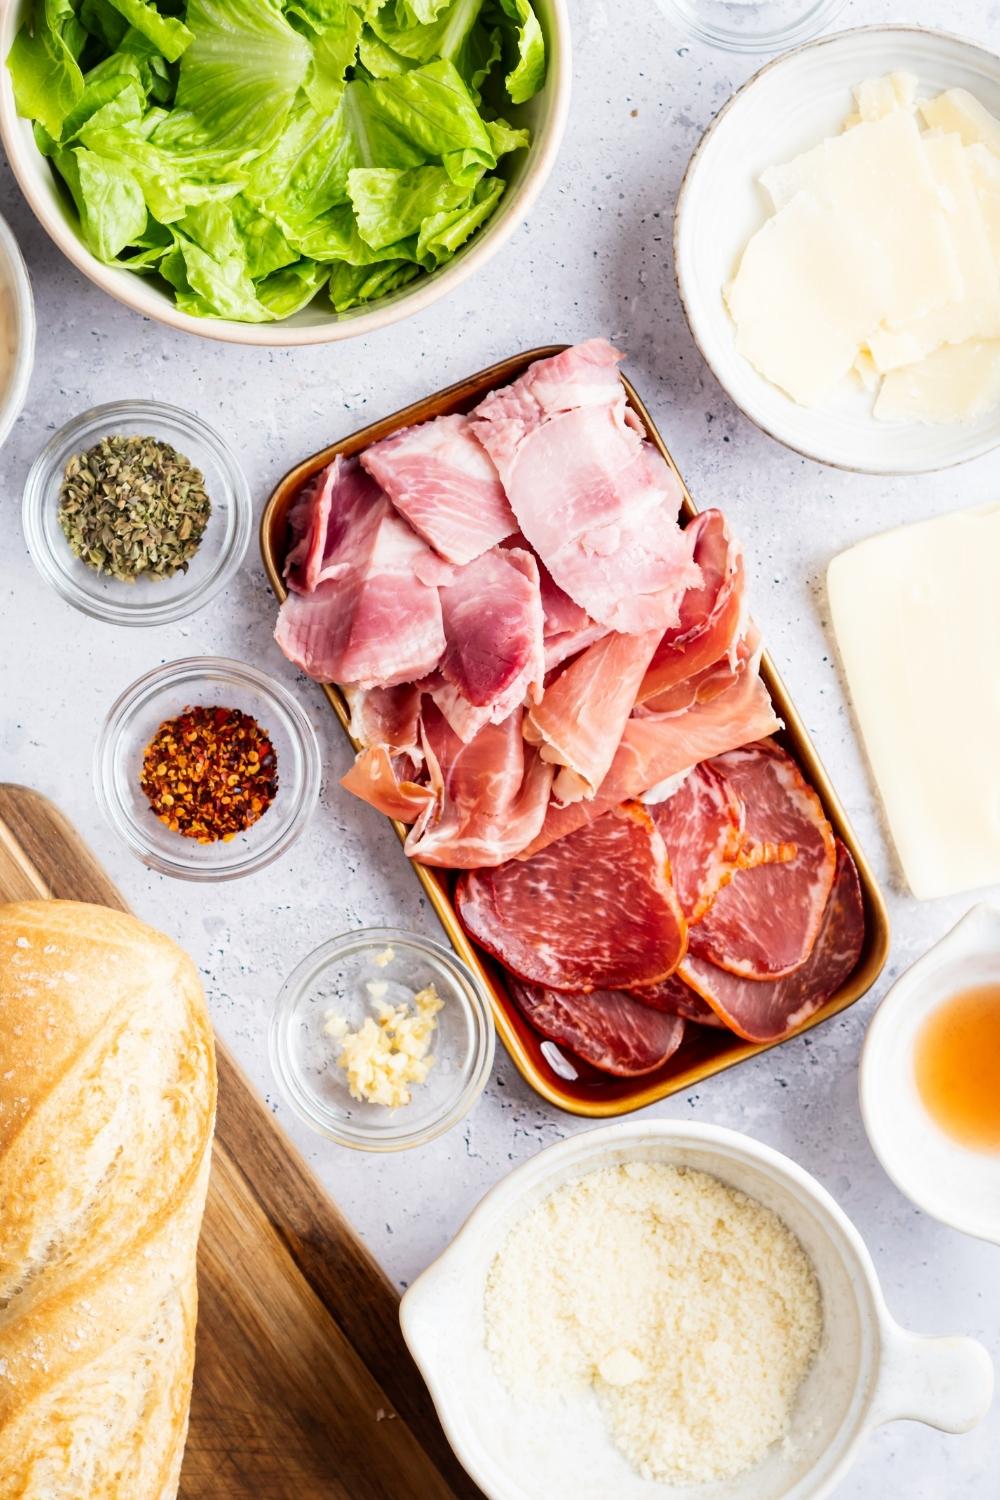 An overhead view of a tray of Italian cold cuts, a bowl of chopped Romain lettuce, a bowl of fresh shaved Parmesan, a bowl of grated Parmesan, and three small bowls containing red pepper flakes, minced garlic, oregano.